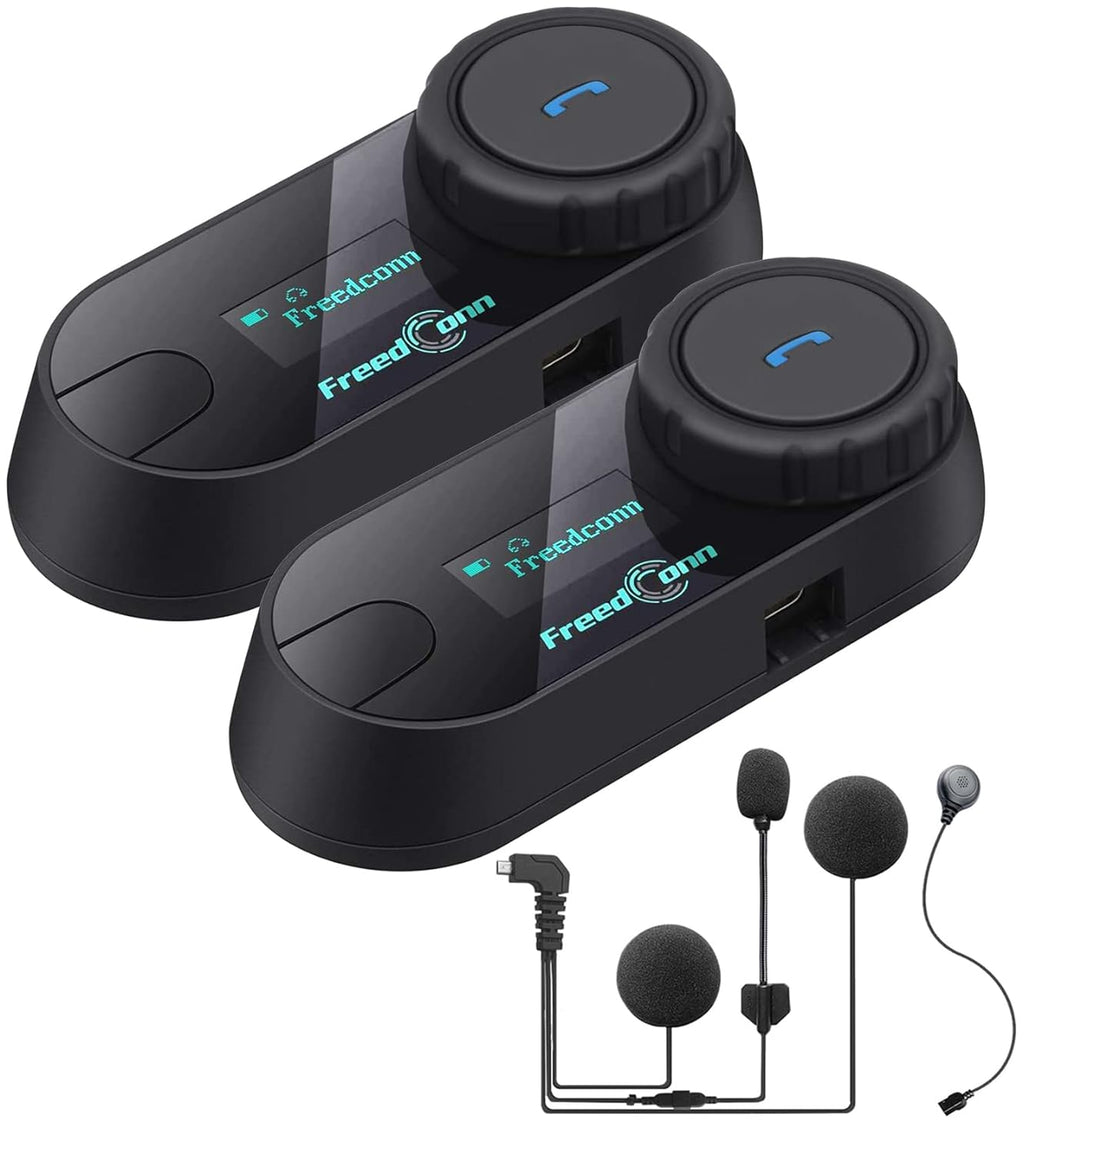 FreedConn TCOM-SC Motorcycle Helmet Bluetooth Intercom Headset Communication Systems Kit, for 2 or 3 riders, LCD Screen/FM Radio/Mobile phone/MP3/GPS connective/Range 800m/Handsfree (2 Pack)